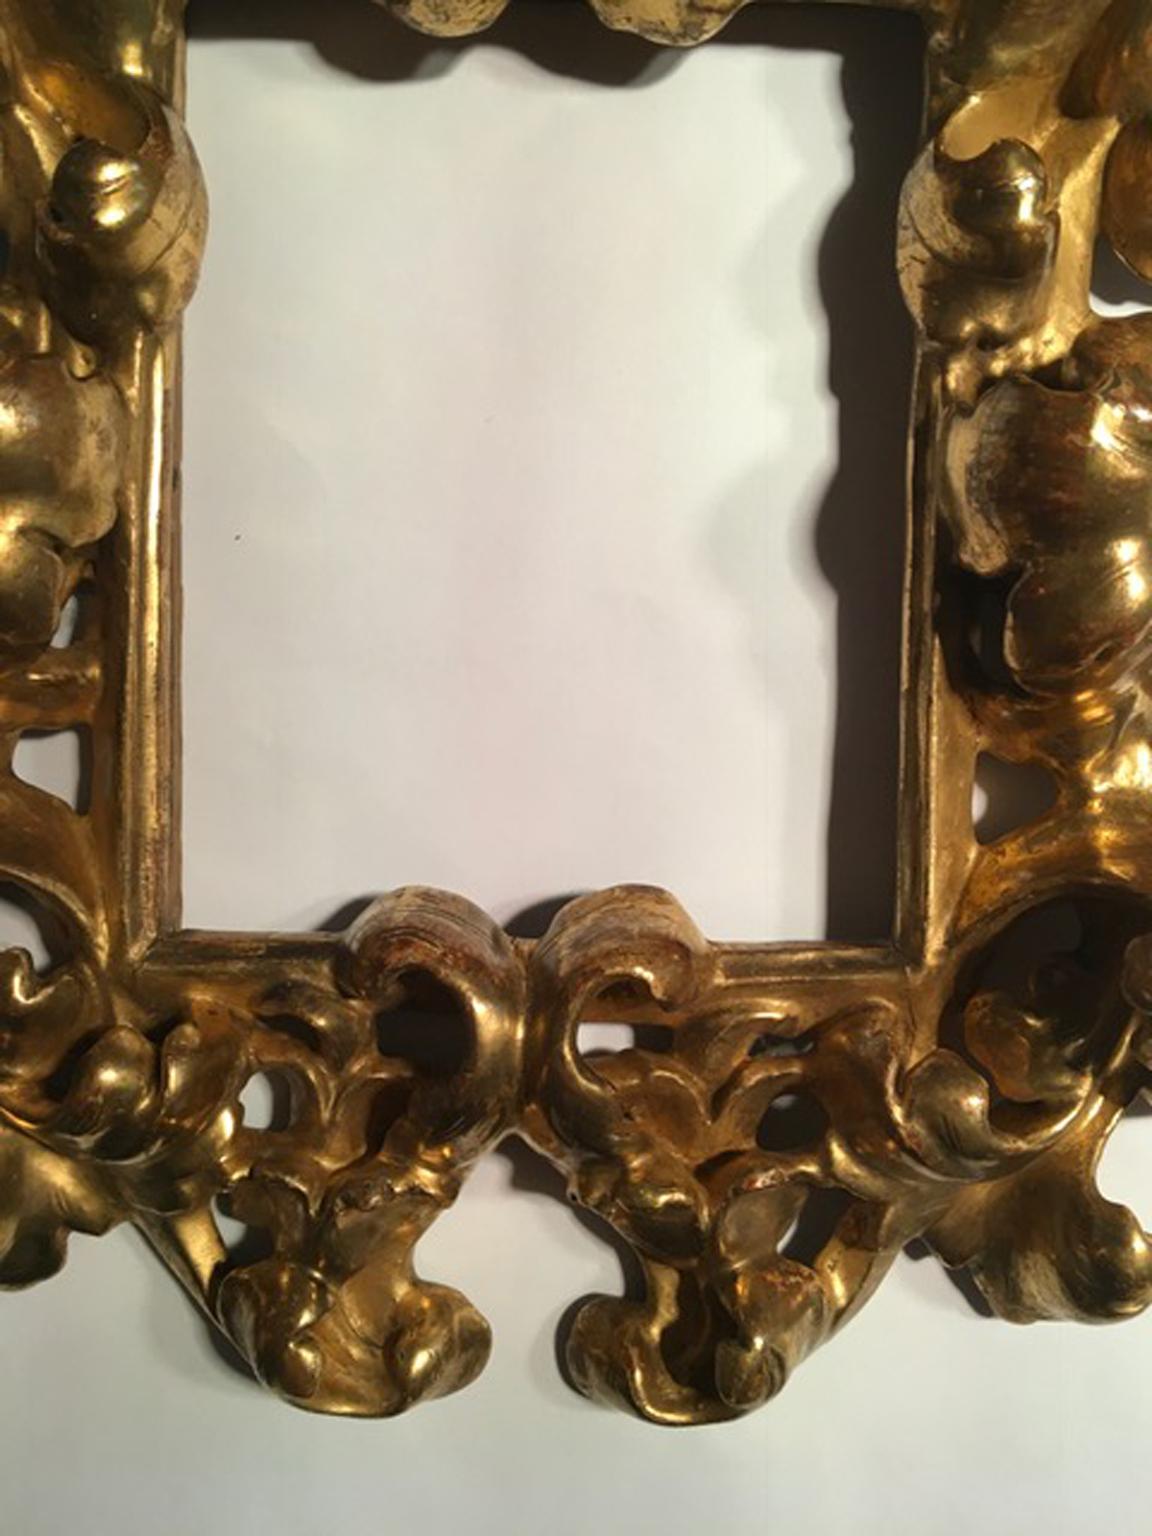 Hand-Crafted Italy 18th Century Golden Wood Frame in Tuscany Late Renaissance Style Florence